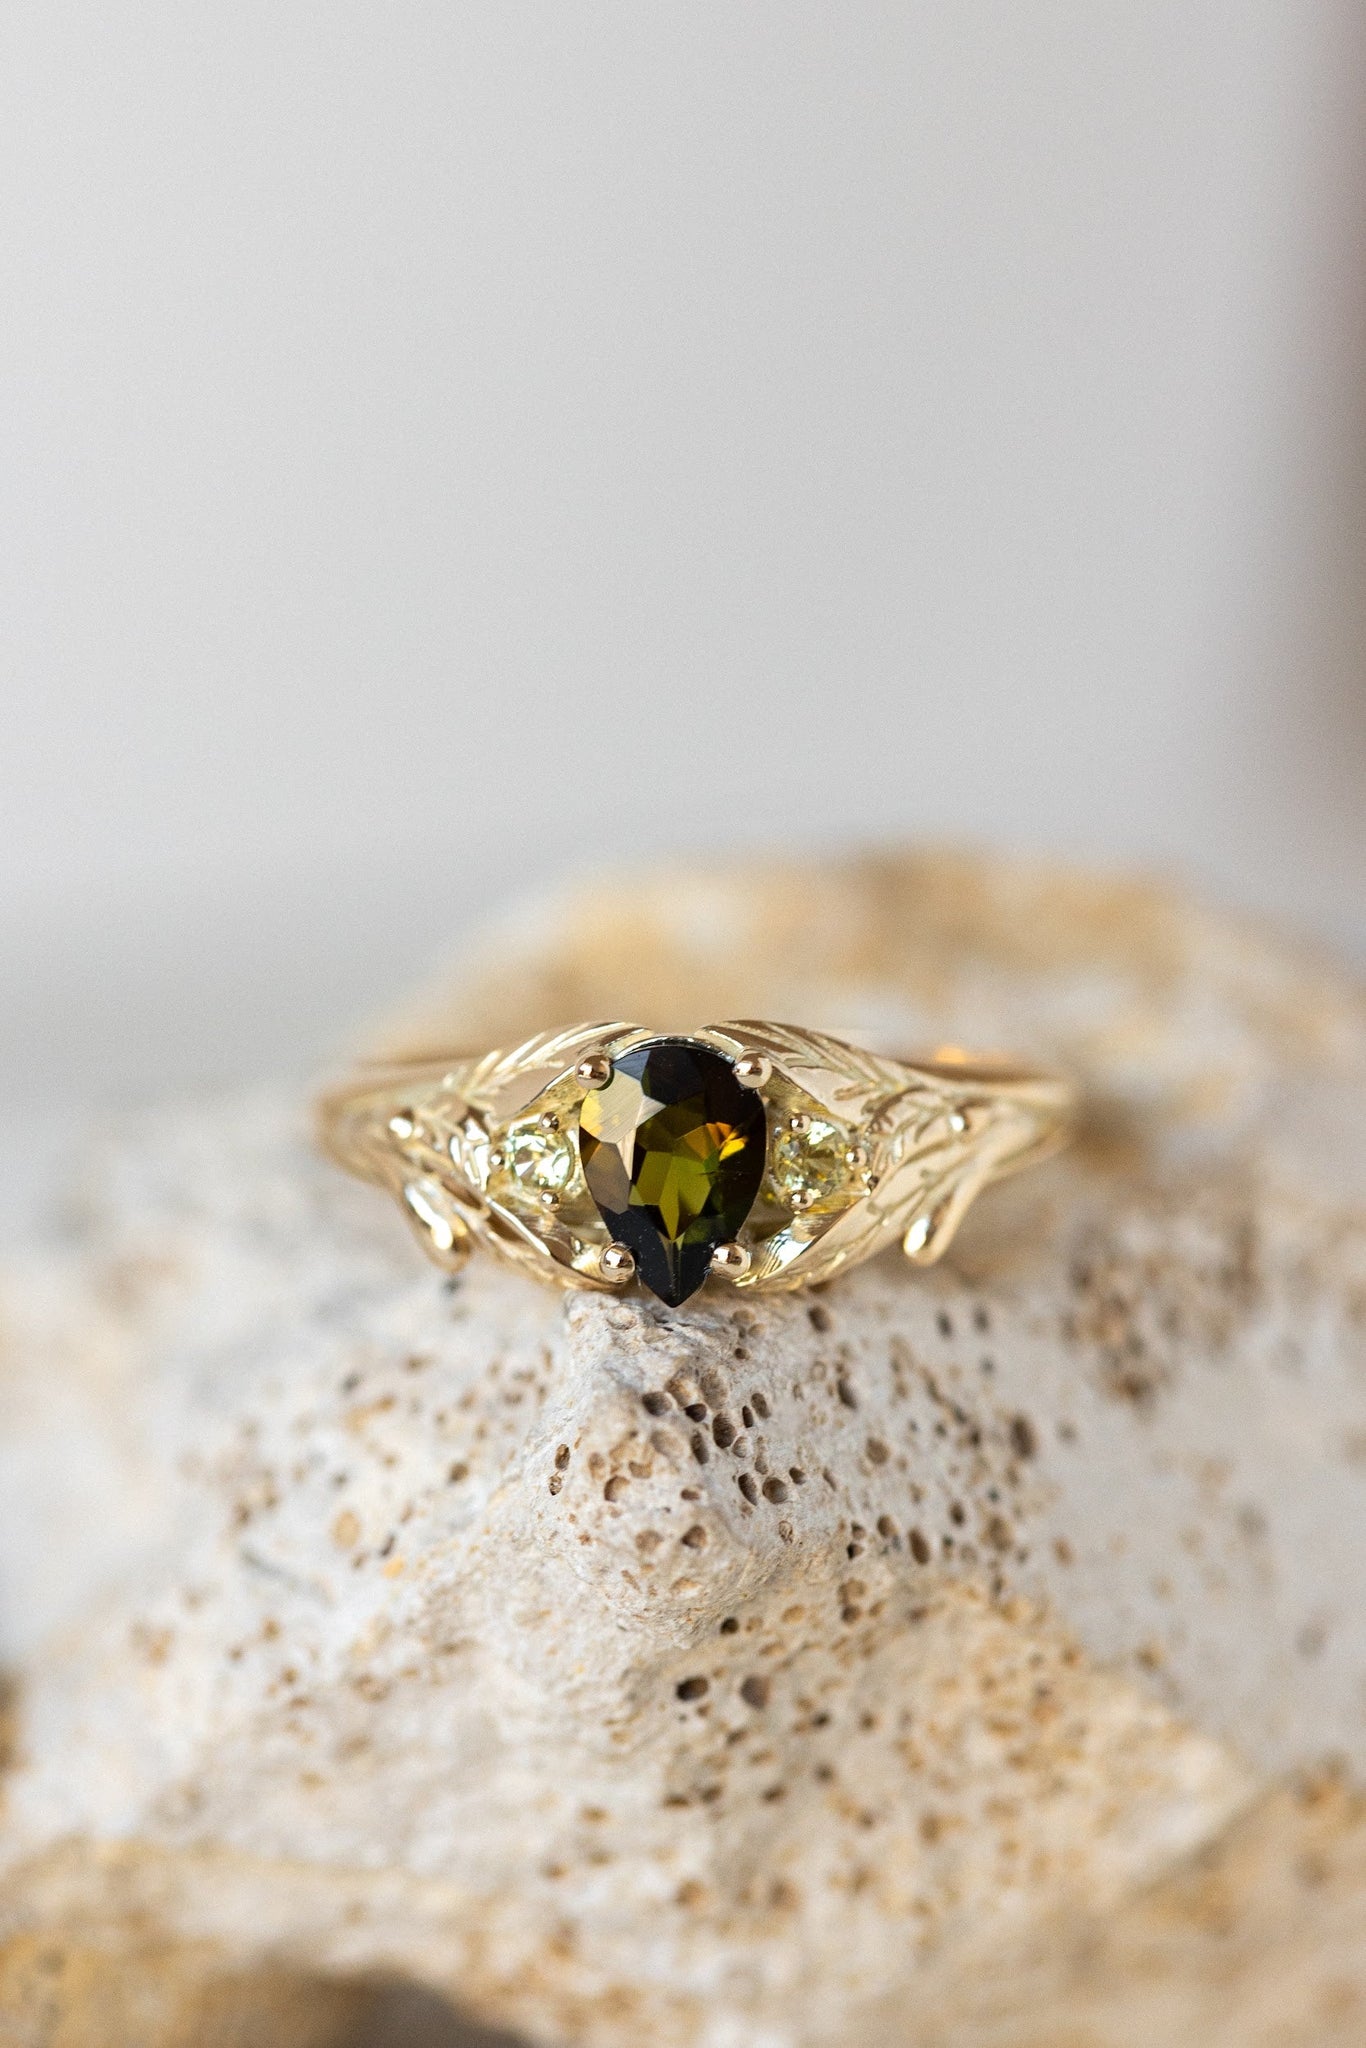 Green tourmaline engagement ring, gold leaf ring with side yellow sapphires / Wisteria - Eden Garden Jewelry™